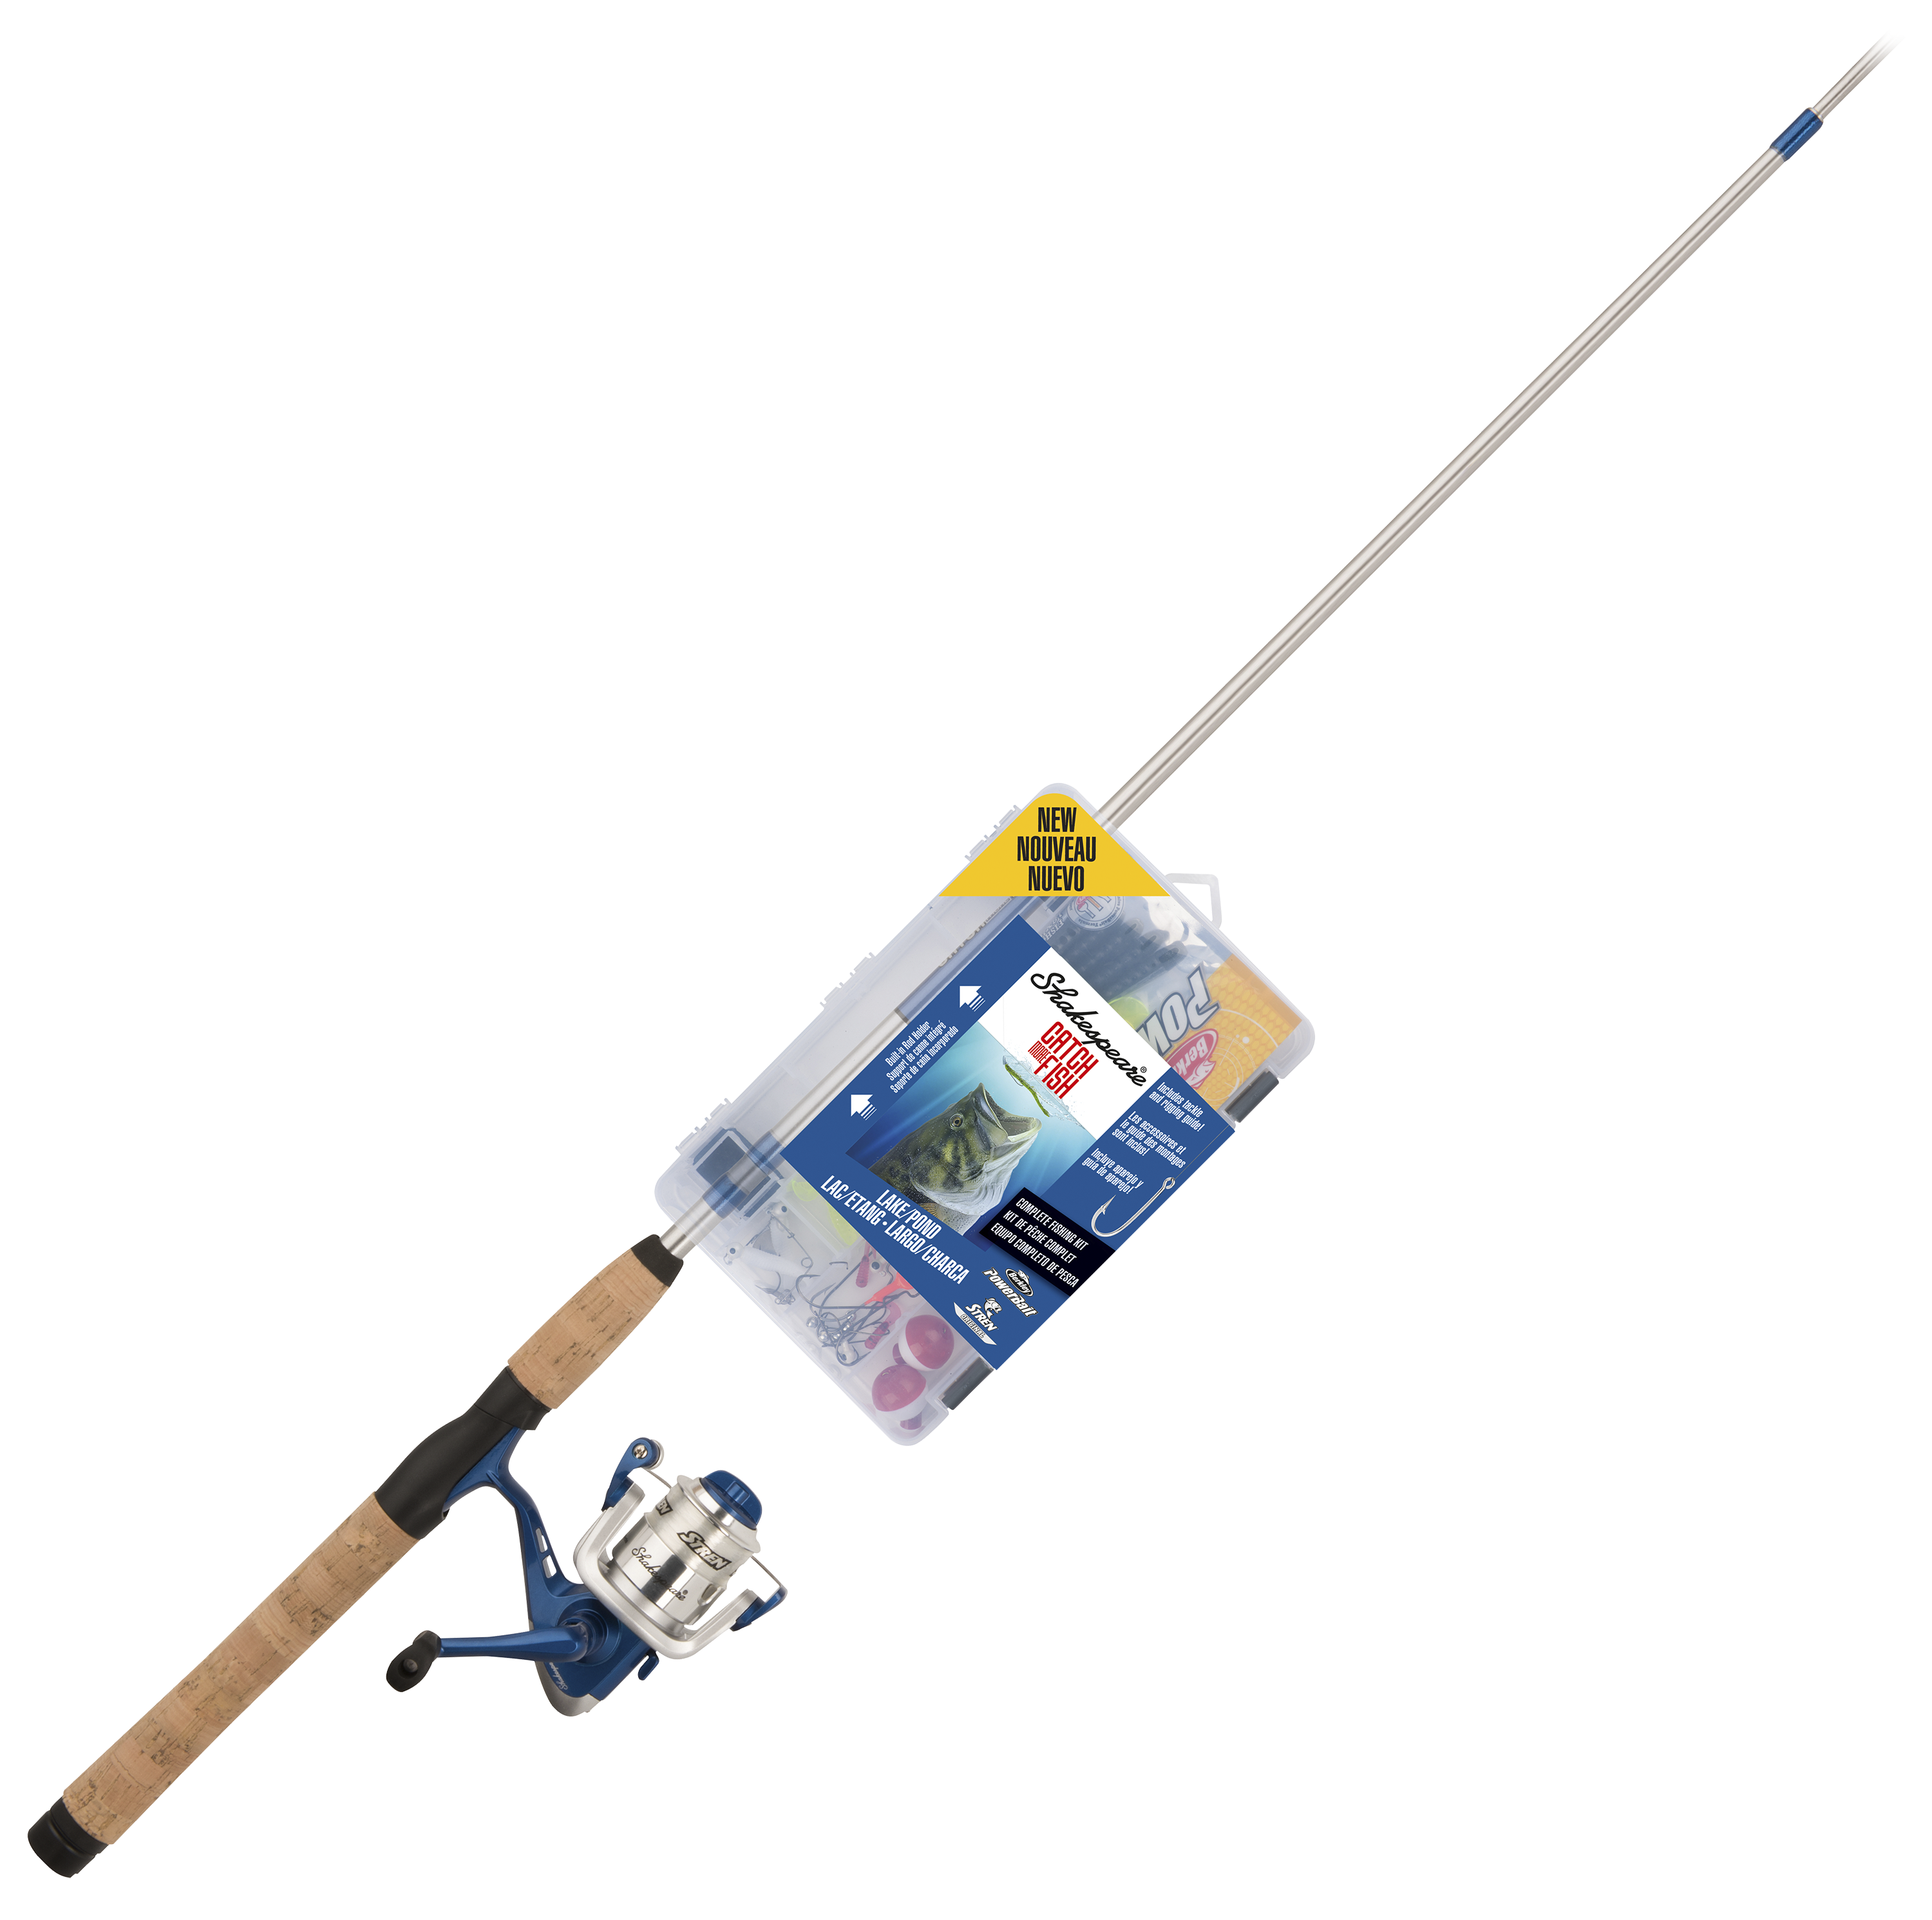 Shakespeare Catch More Fish Spinning Rod and Reel Combo for Lake/Pond Fish